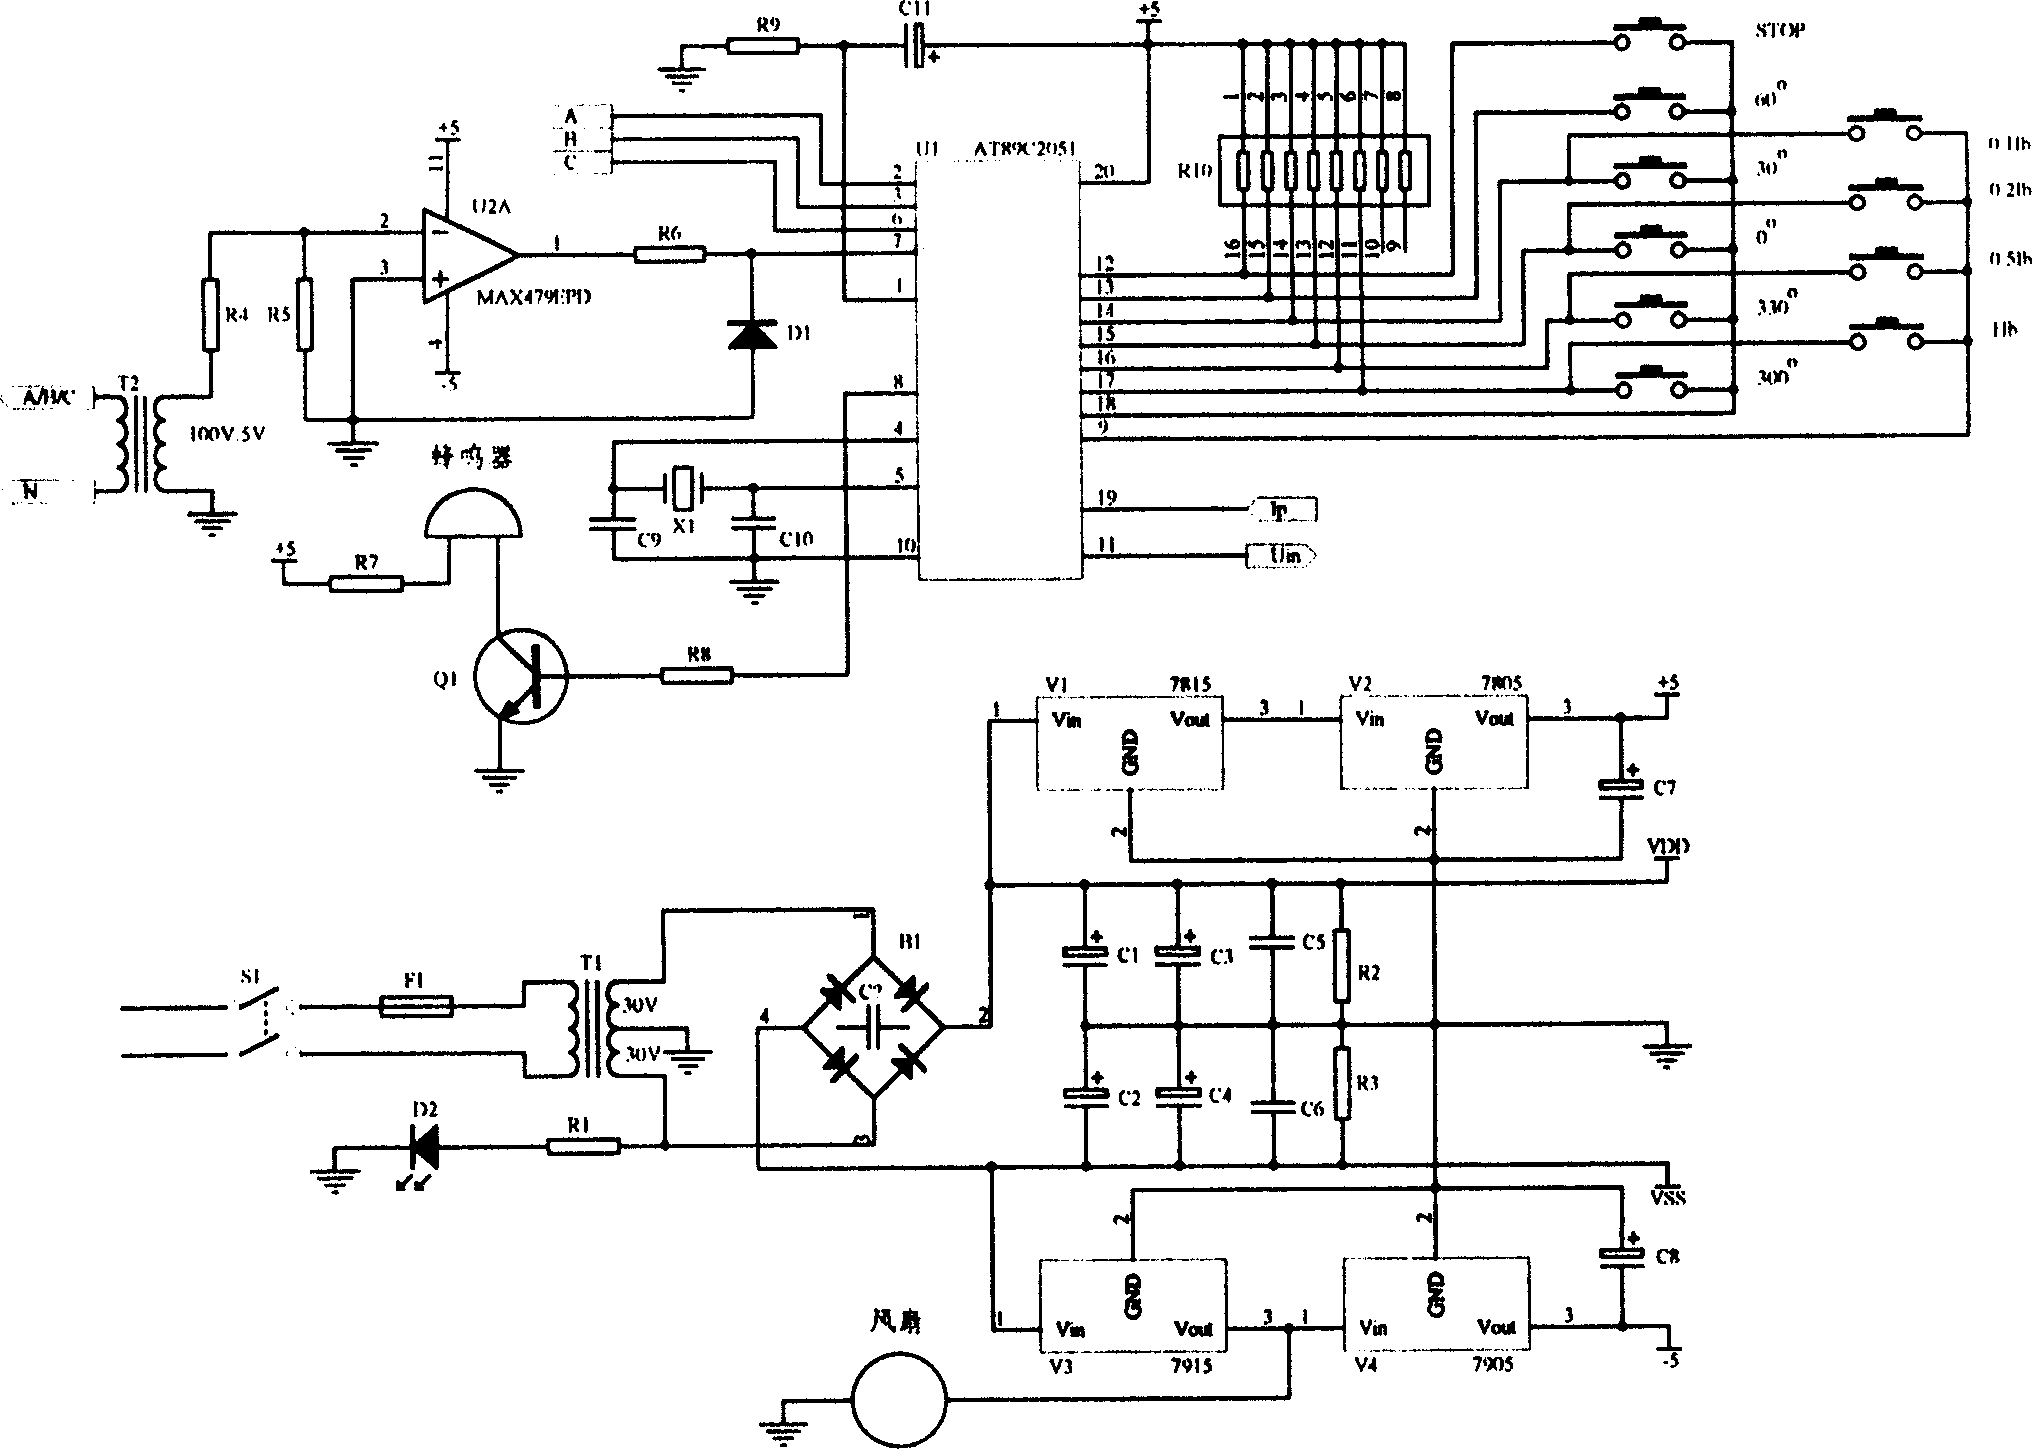 Fictitious load source for in-situ checking electric energy meter